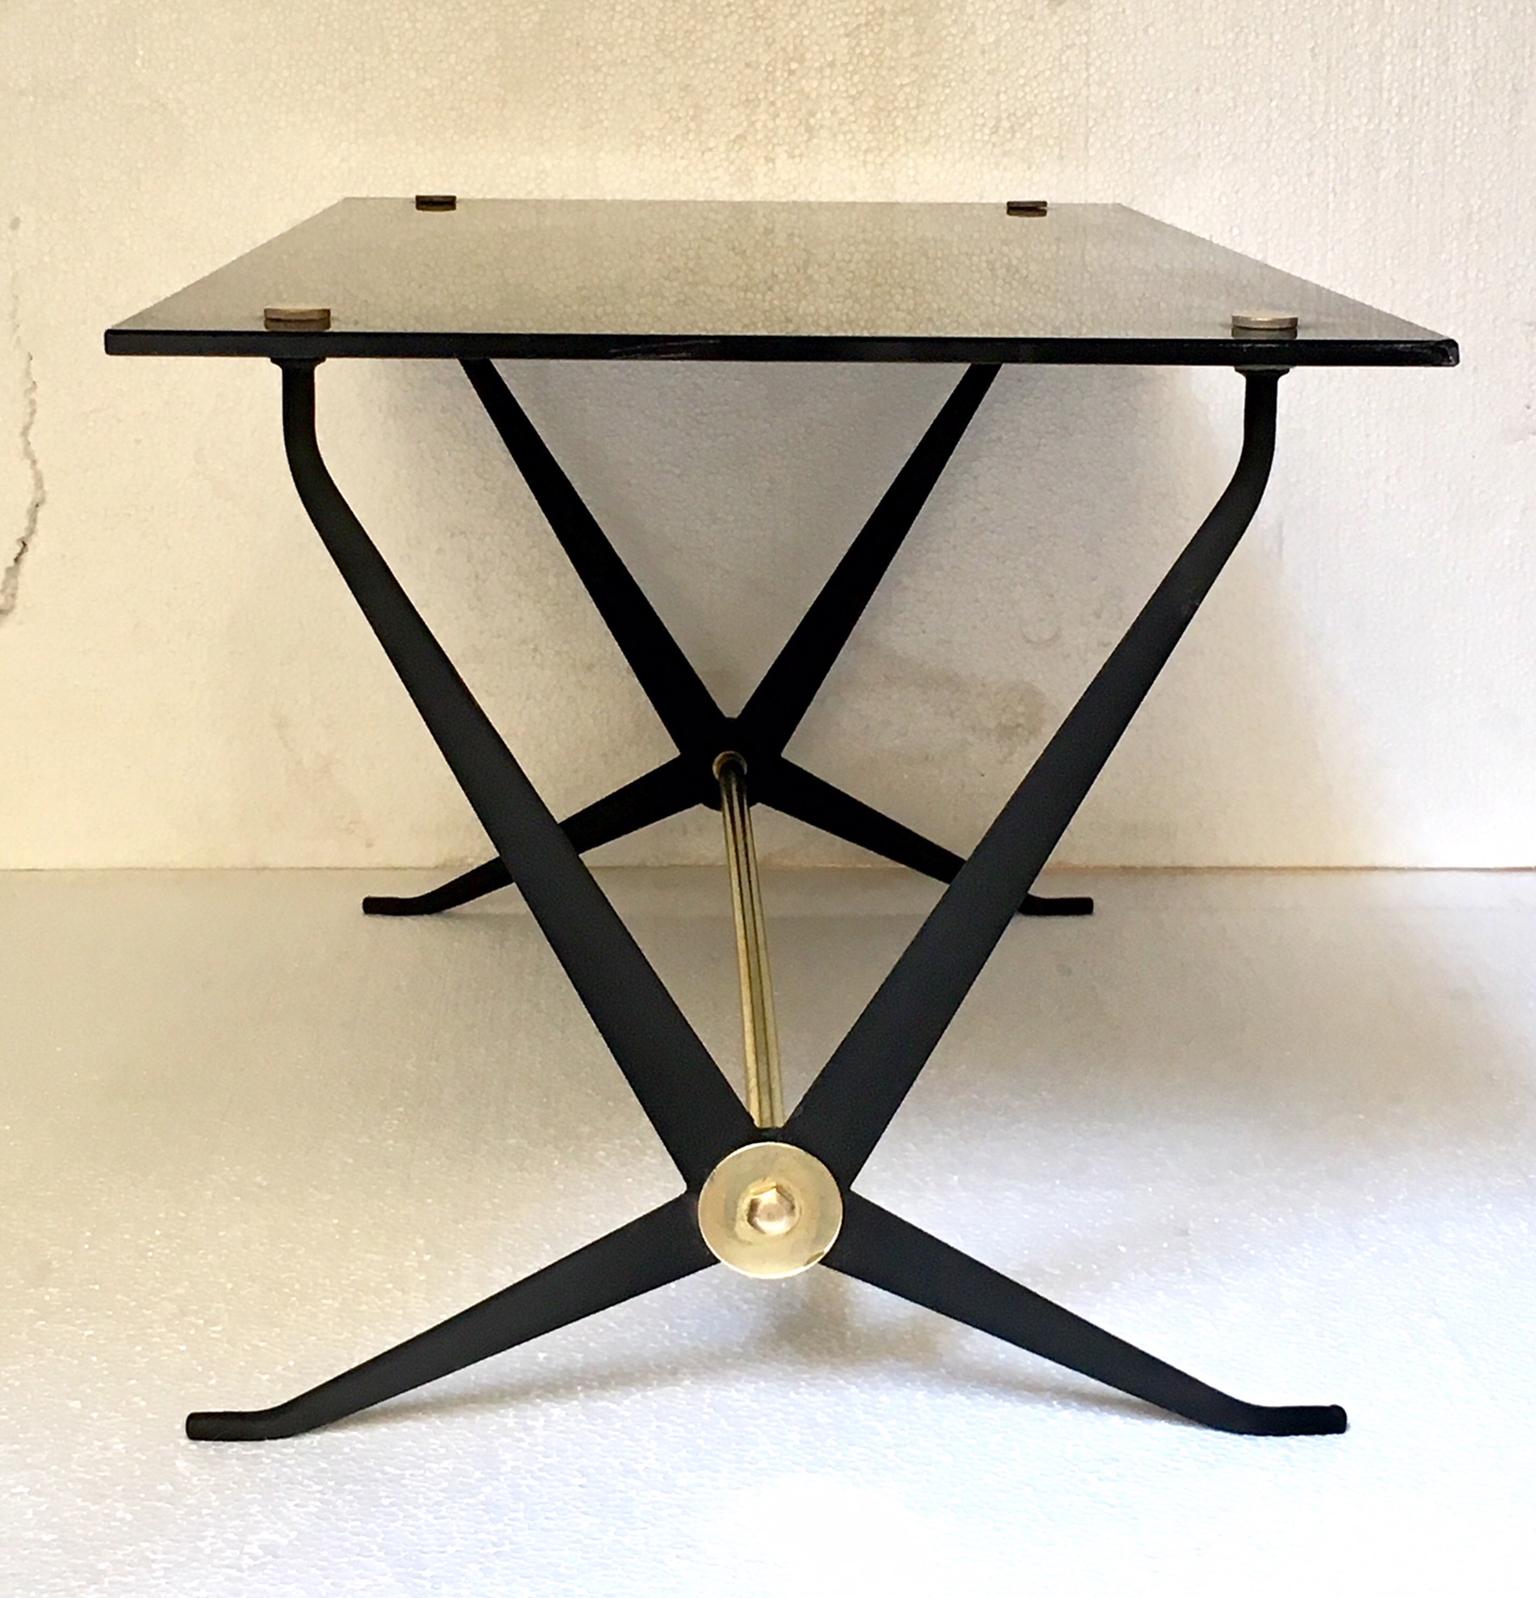 Angelo Ostuni midcentury brass and black opaline glass Italian coffee table, 1950

Italian coffee or end table designed by Angelo Ostuni., made in brass and black painted metal, the to is black opaline glass.